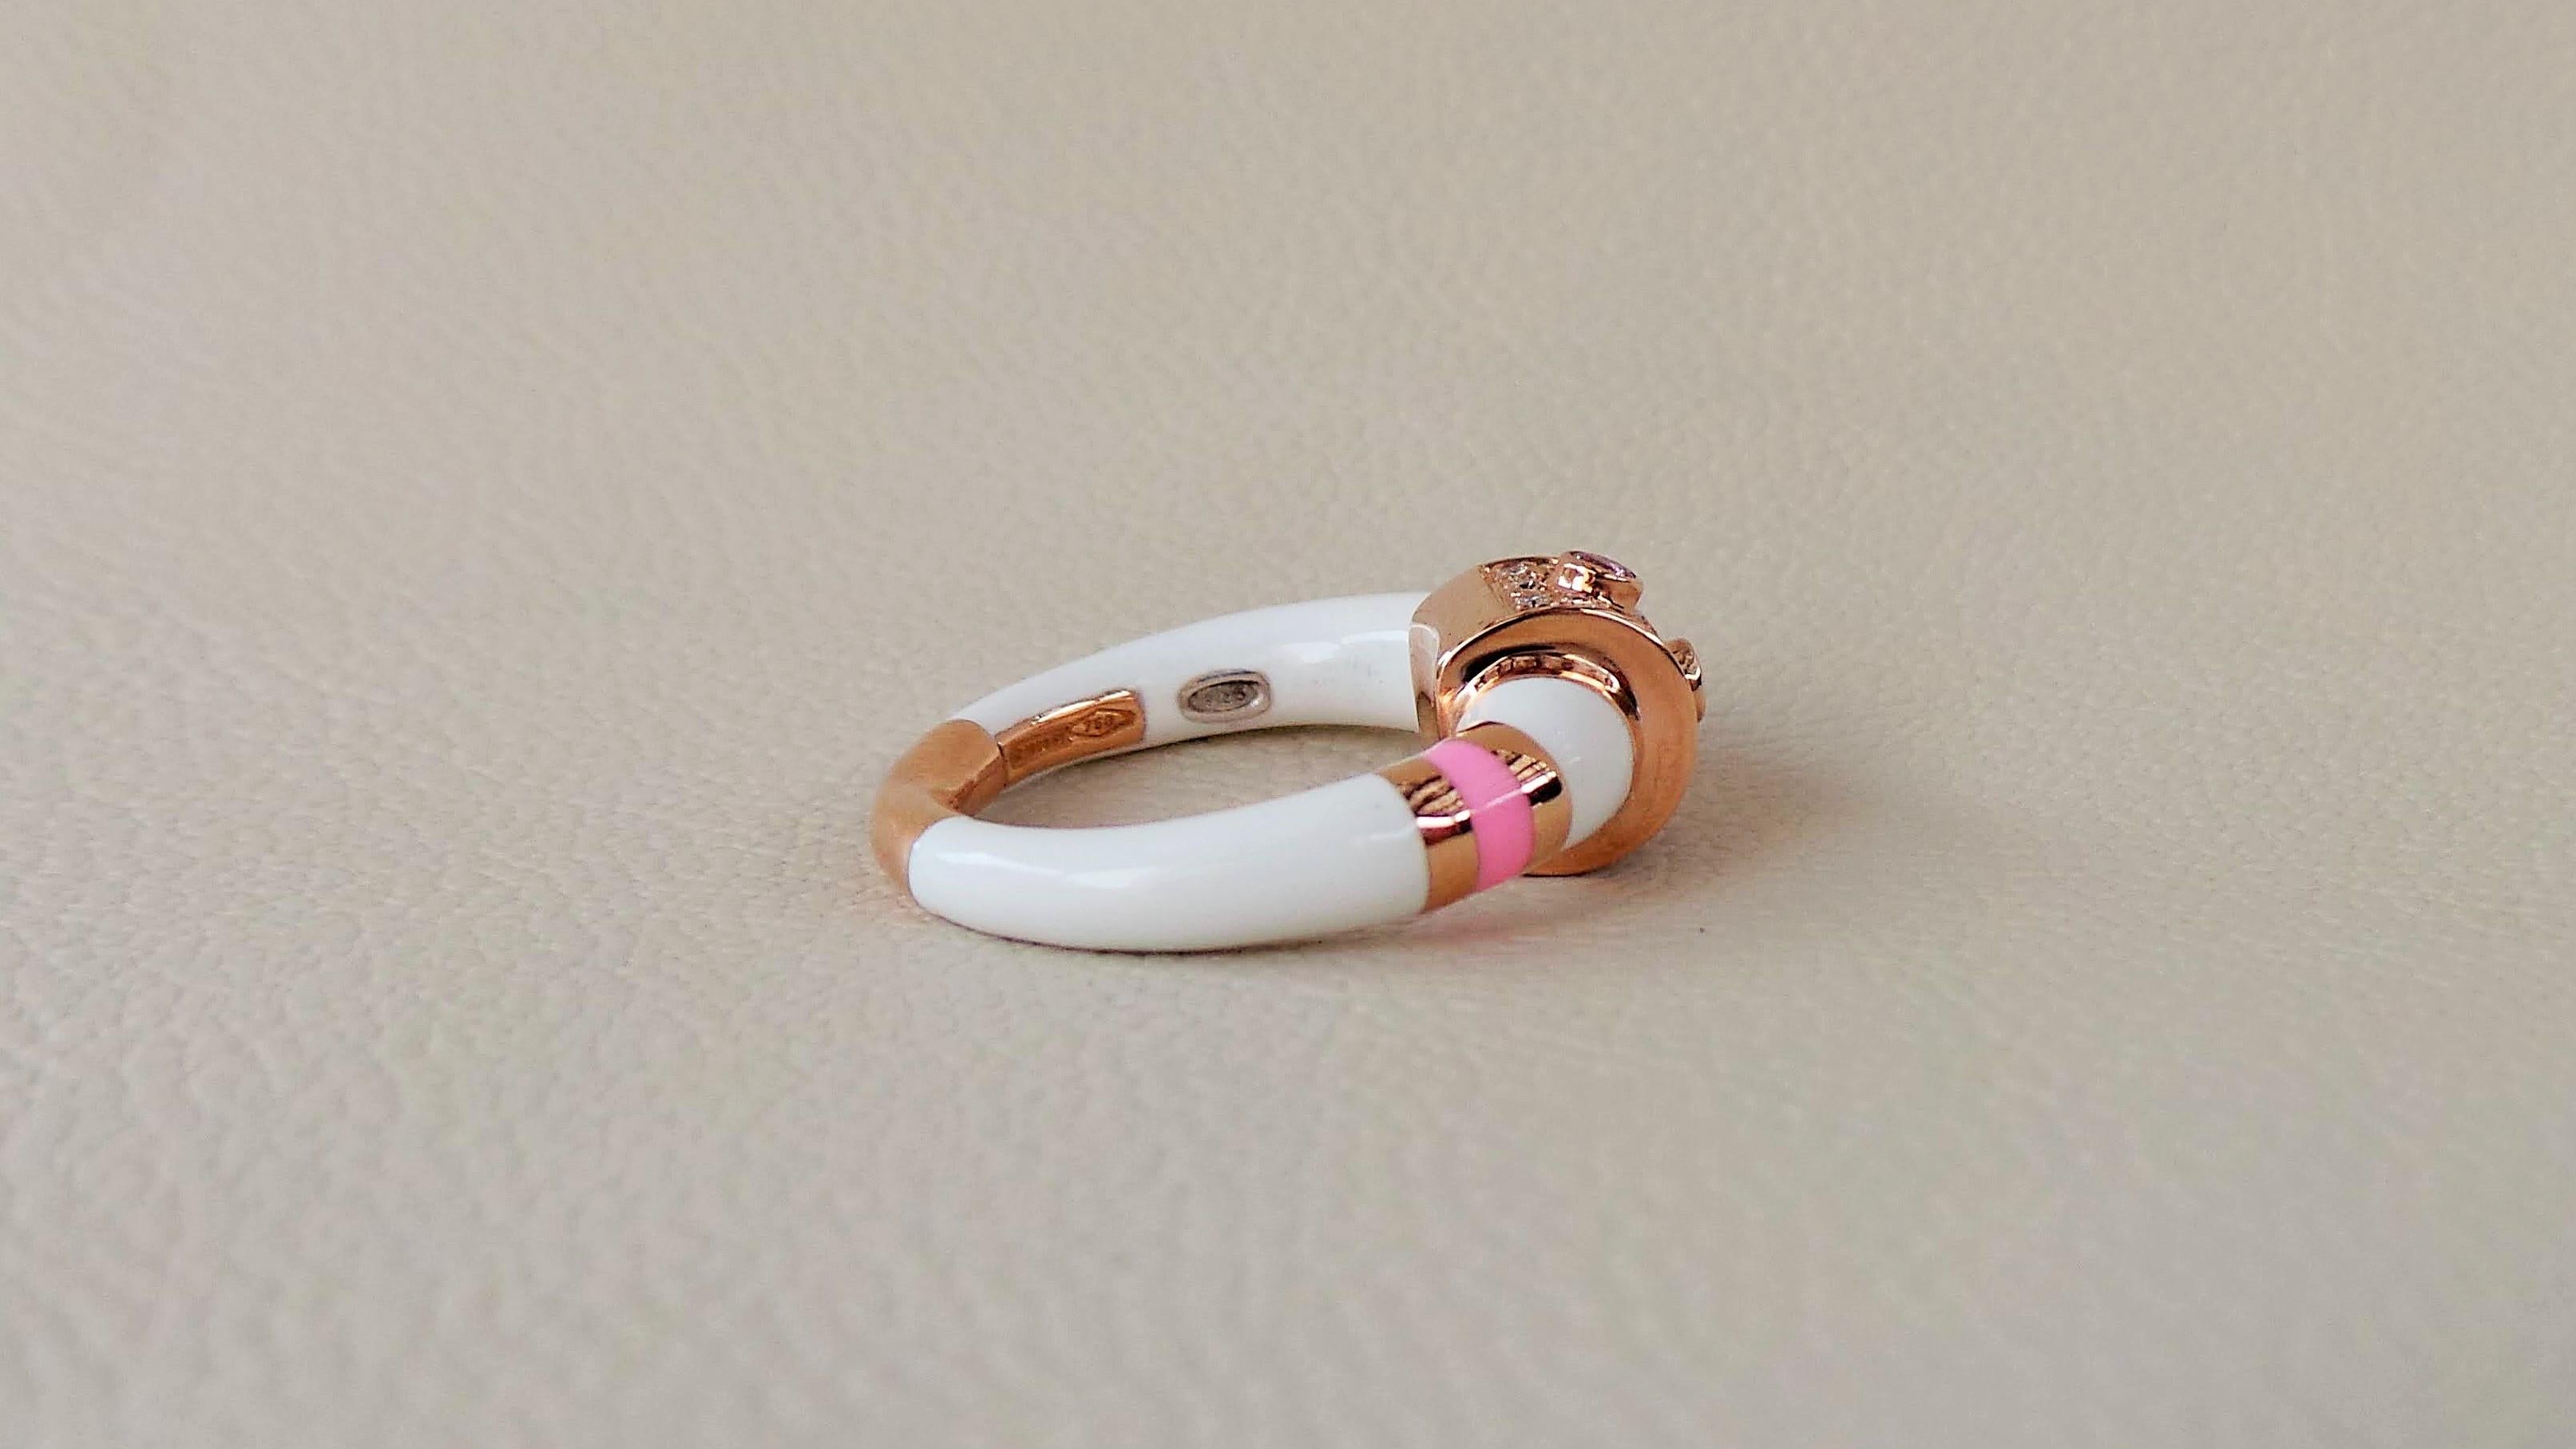 Andrea Macinai created this enamelled design and hand-set stones with 0.19 carat white diamonds cut brillant and 0.10 carats pink saphhires. 
Rose Gold fused with silver inside to better bind the enamel and make it lighter.
This beautiful enamelled